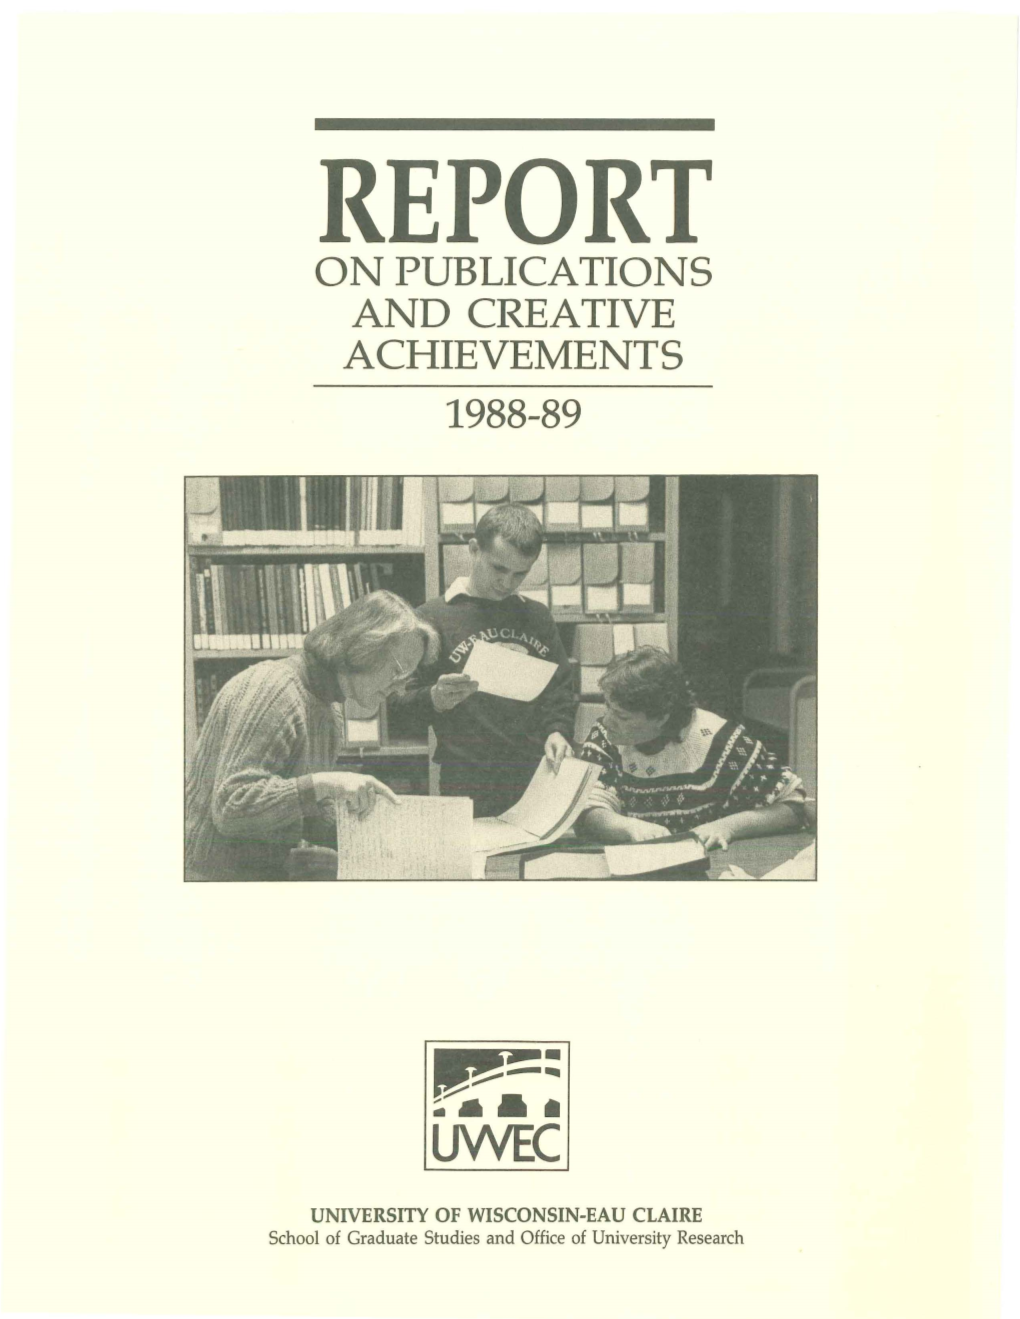 Report on Publications and Creative Achievements 1988-89